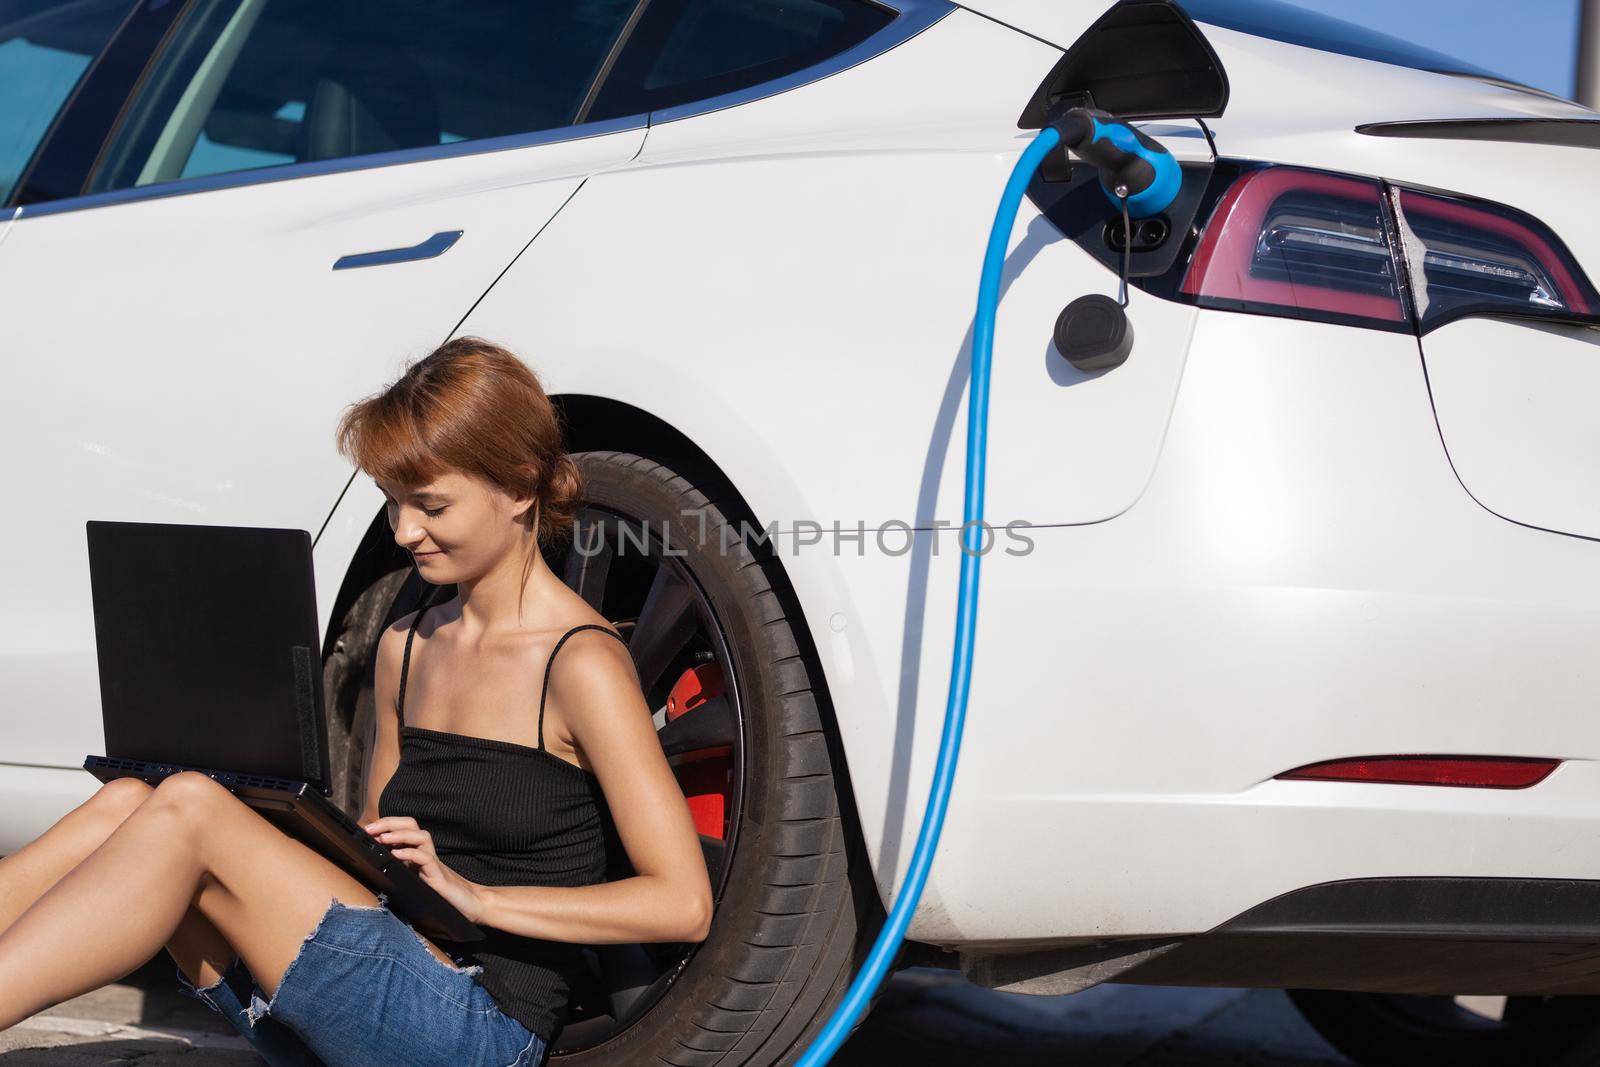 Girl waiting on the ground while her electric car is charging. Working on a laptop computer by kokimk